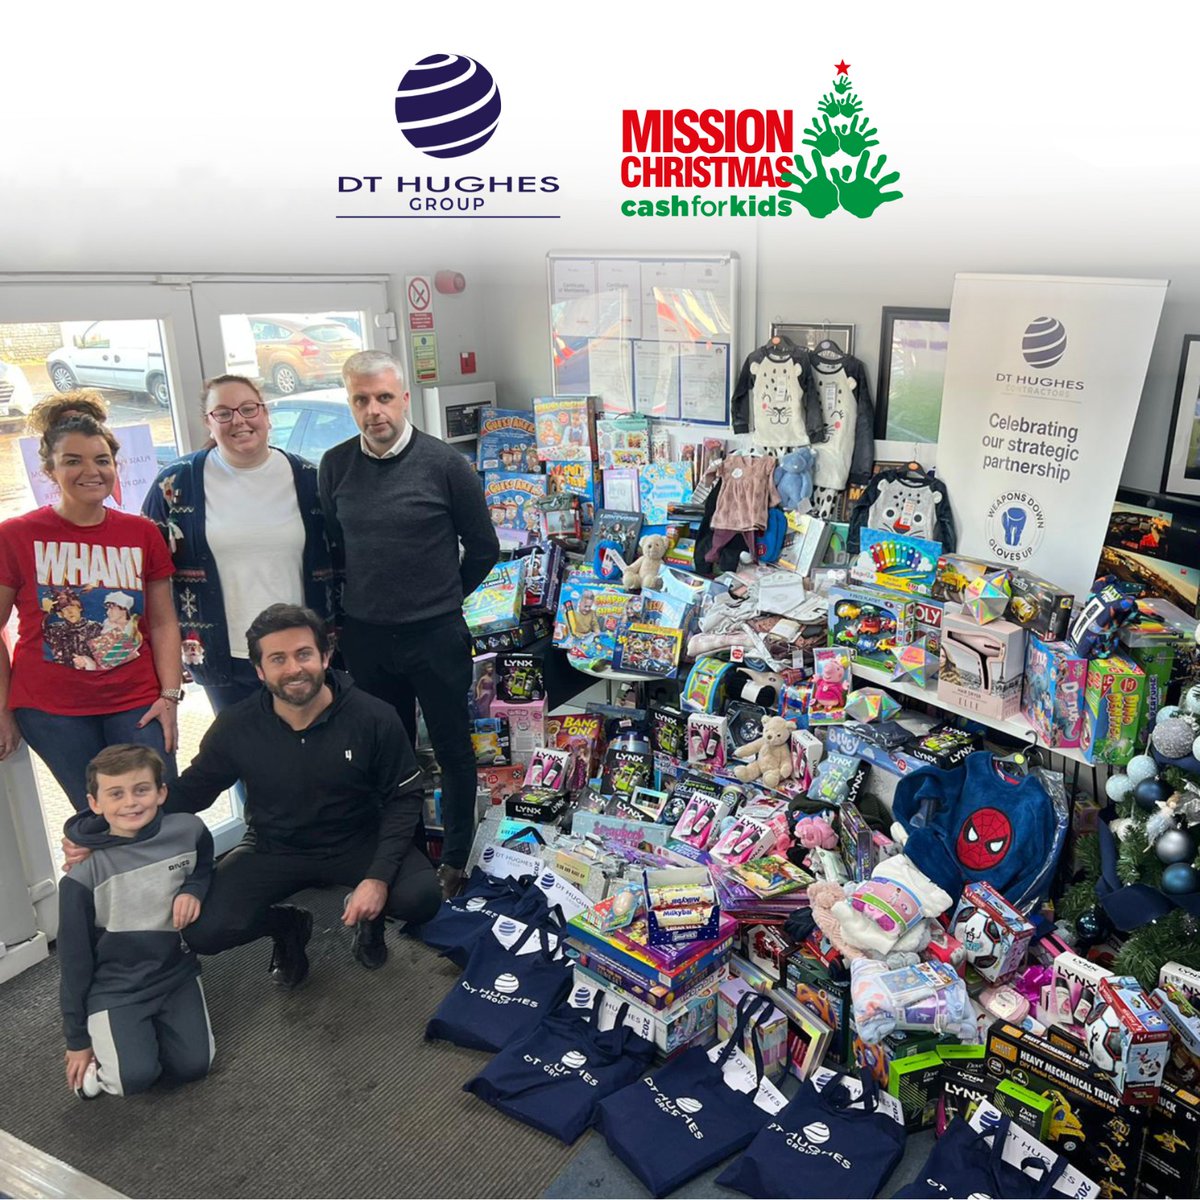 We are so proud to have been a part of this year's Mission Christmas by Cash For Kids. 

A great cause to help those struggling in our community.

#cashforkids #missionchristmas #community